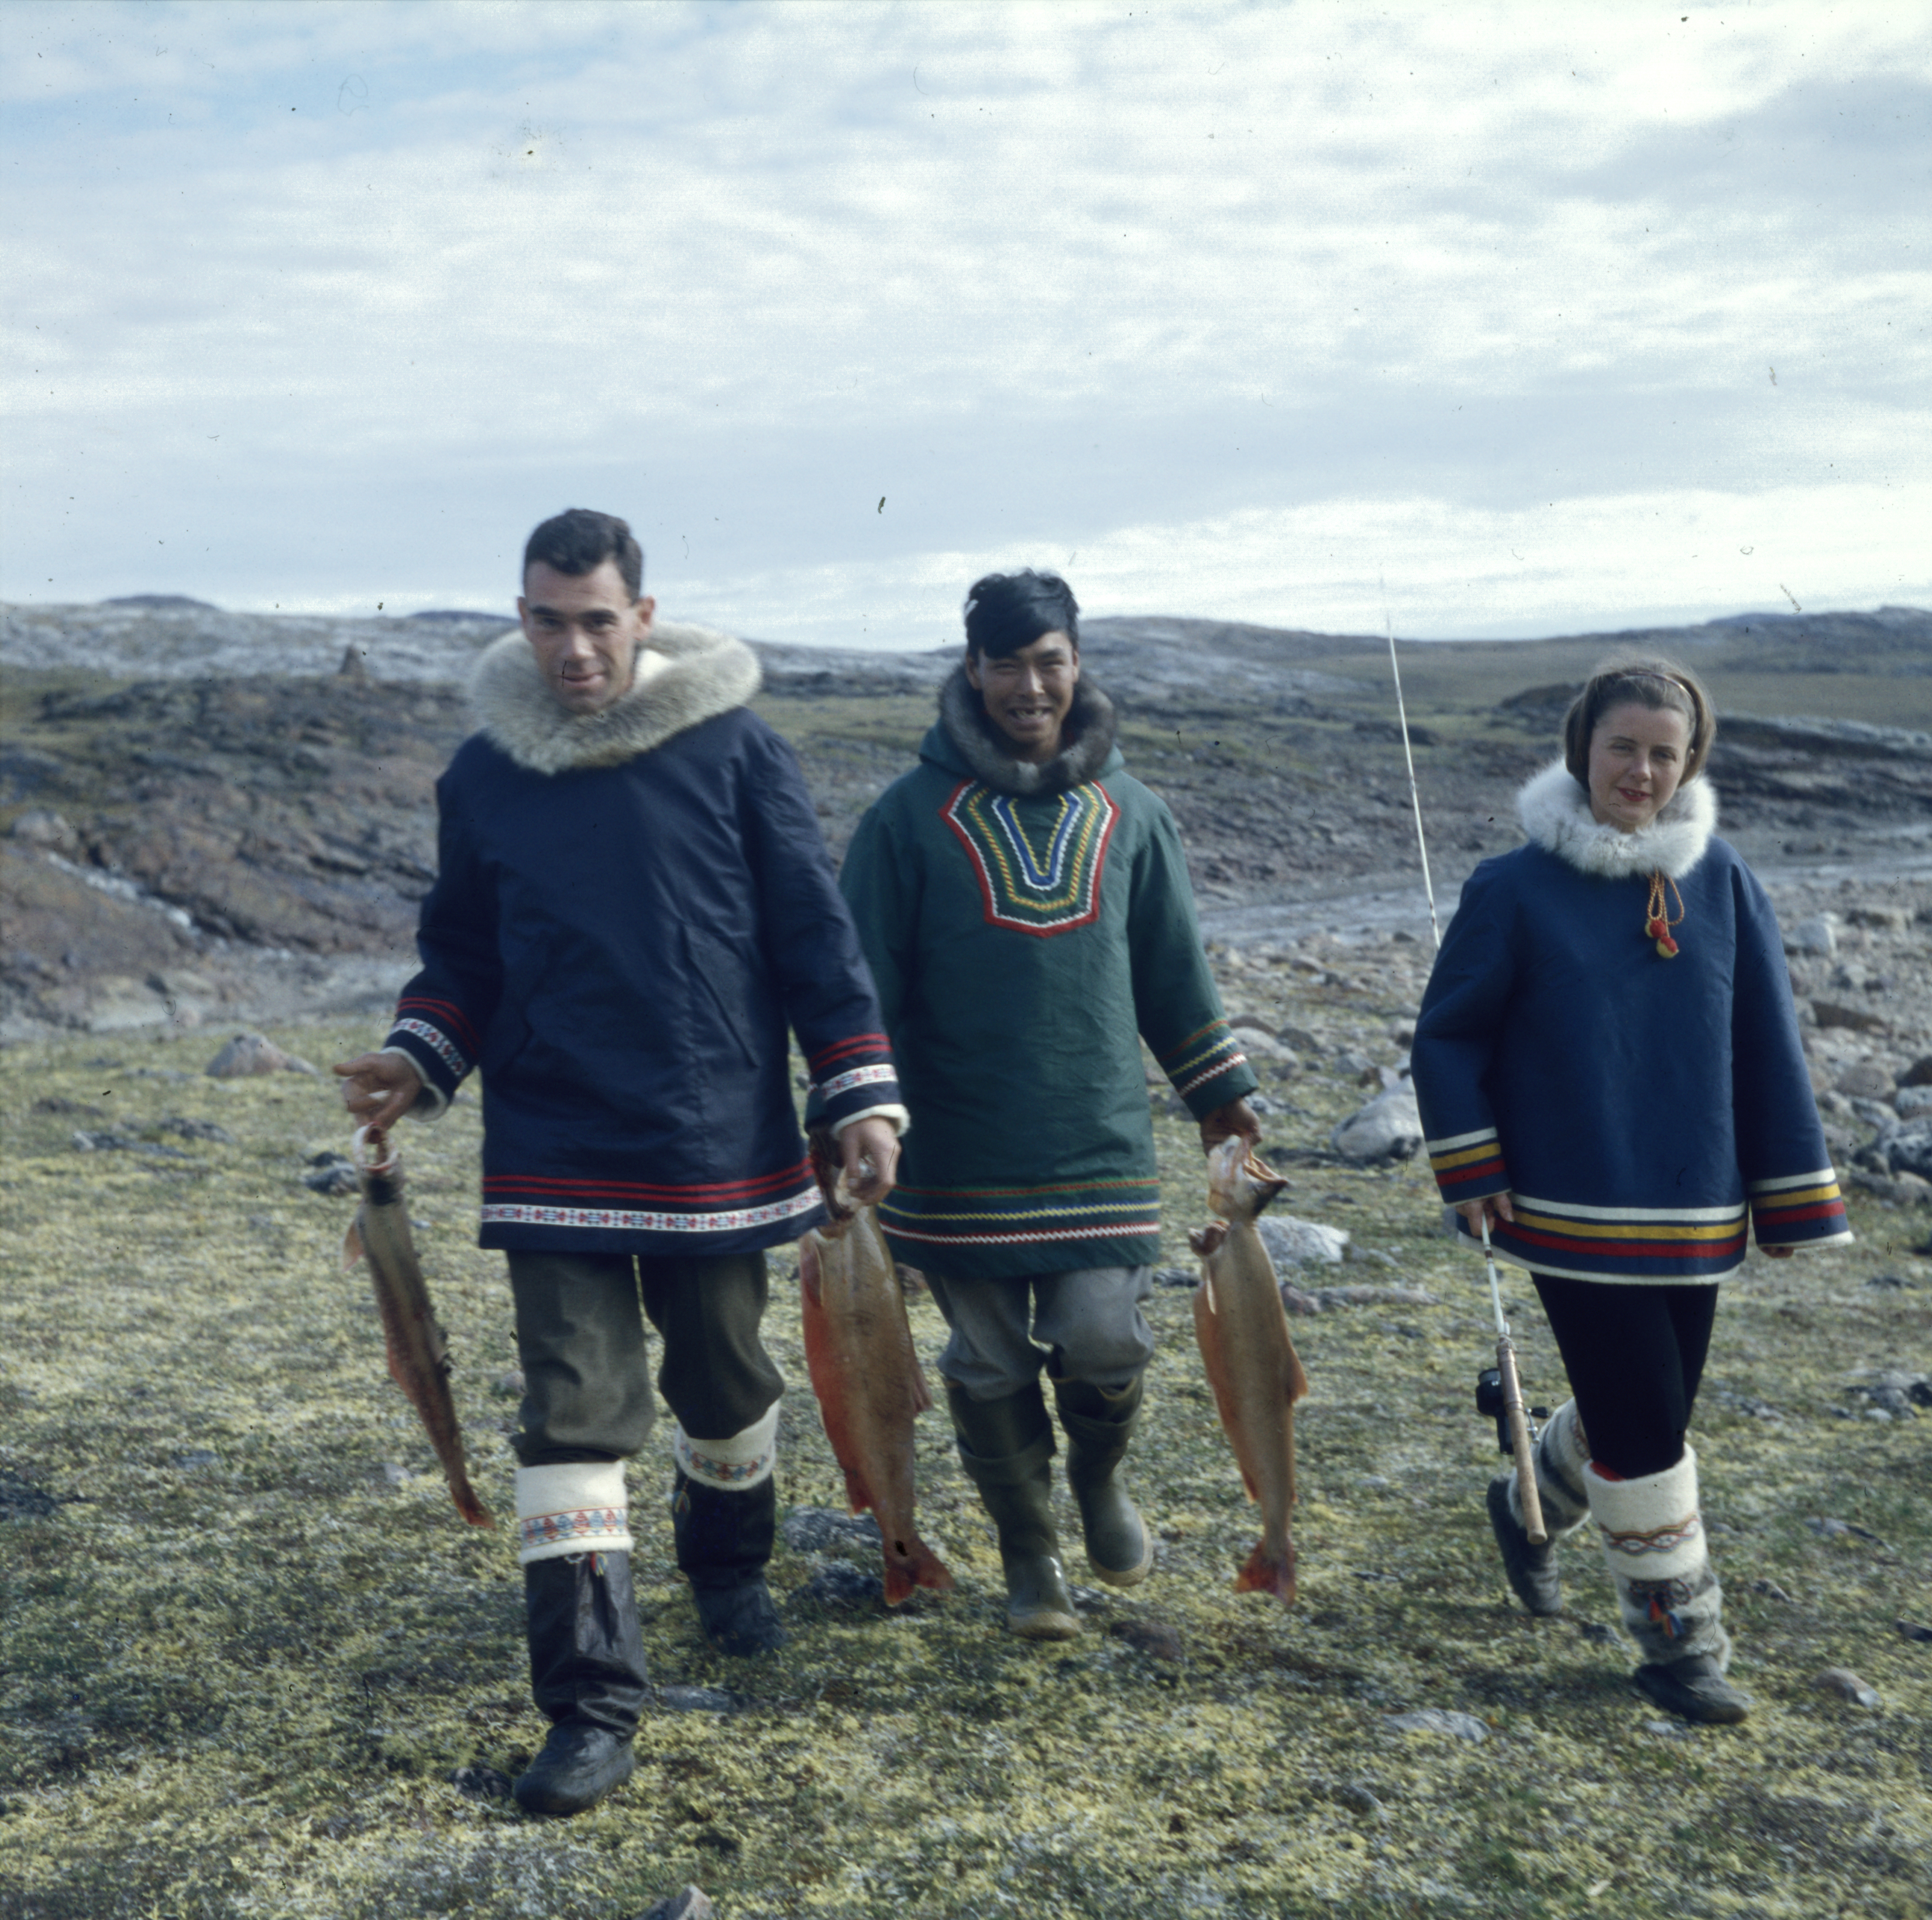 James Houston (left) with Kananginak Pootoogook and an unknown woman, Cape Dorset, 1958. (Rosemary Eaton) © Libraries and Archives Canada